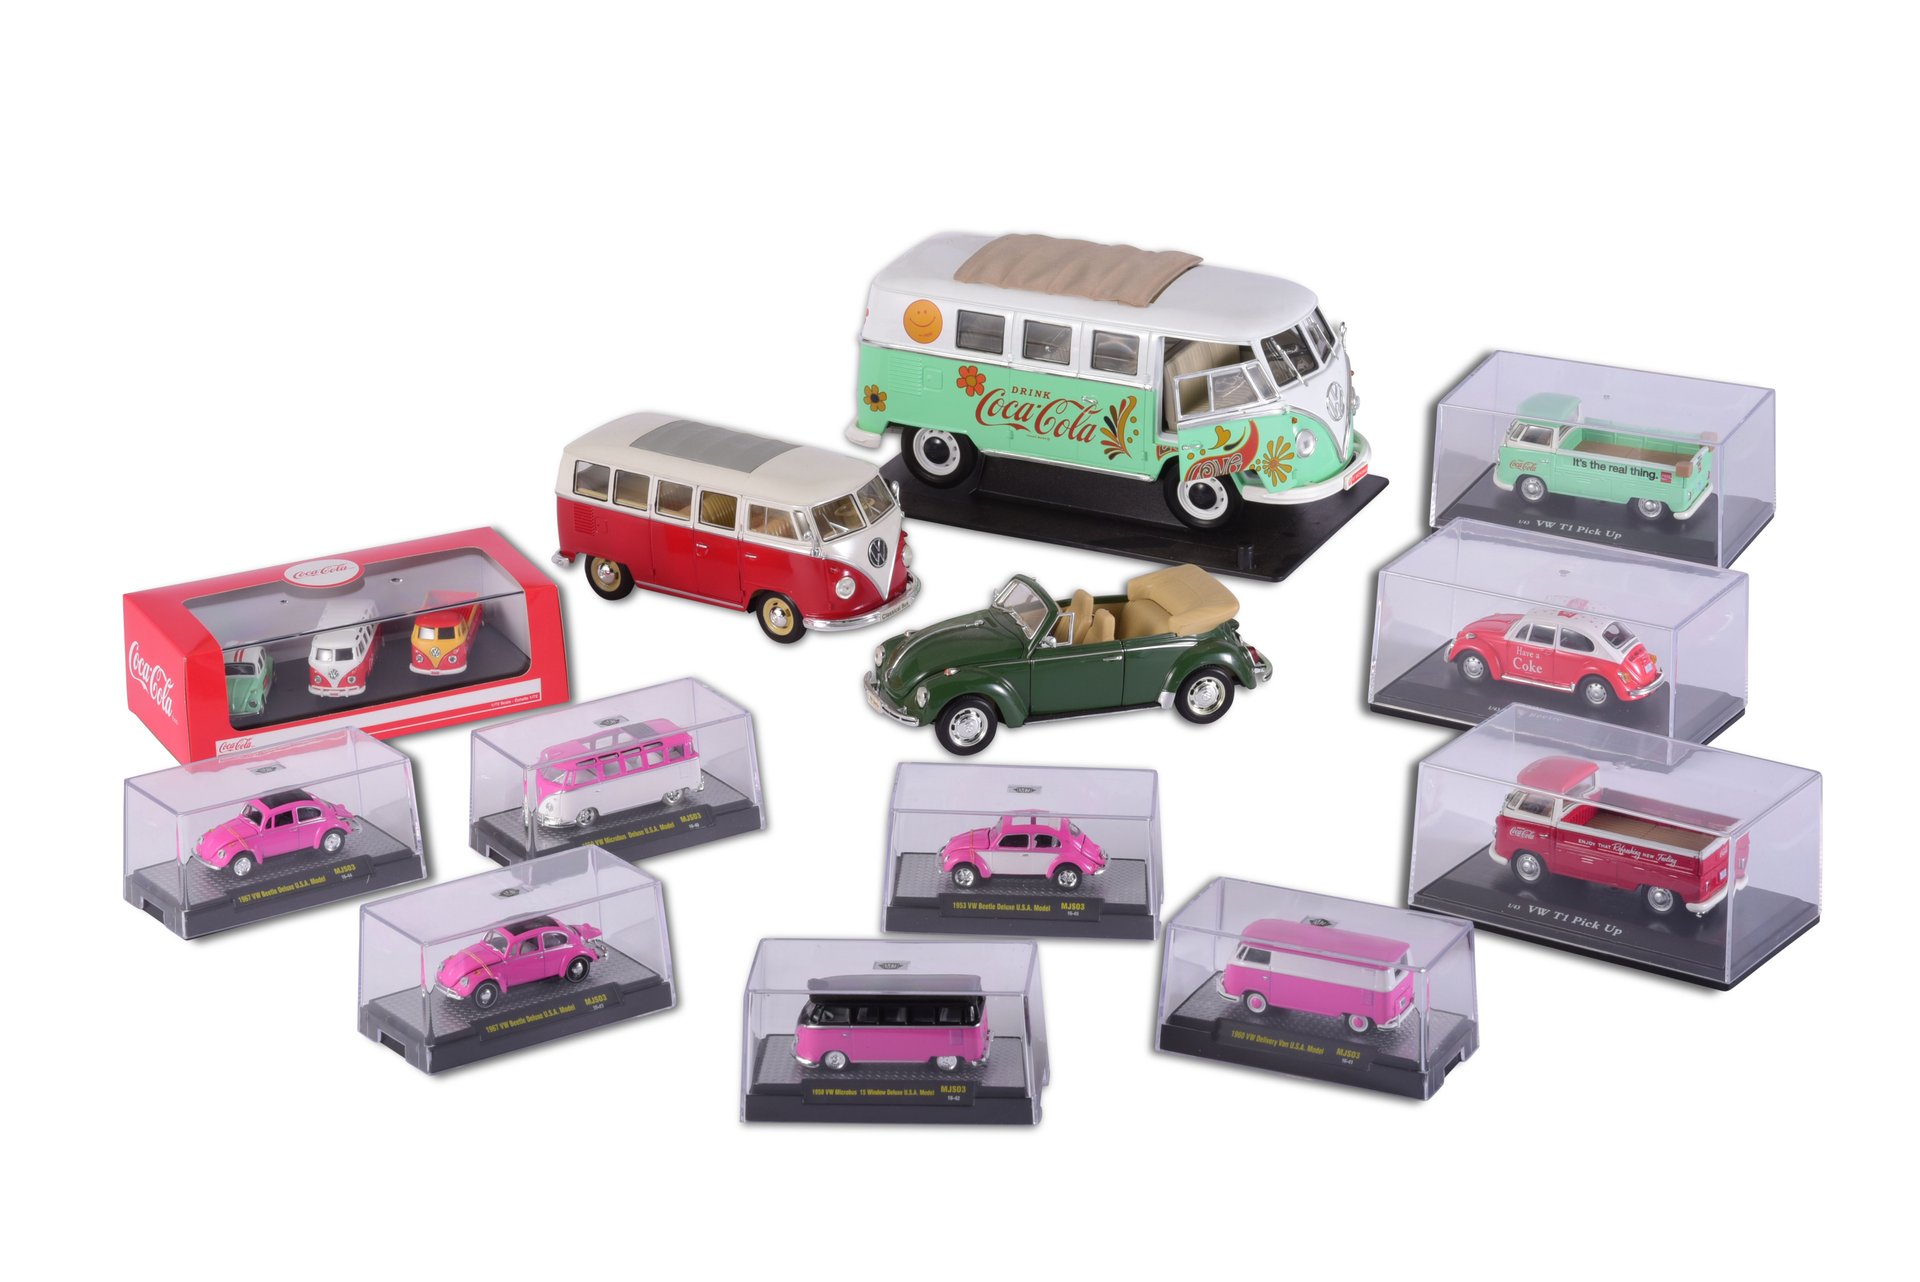 For Sale Group of Volkswagen and Coca-Cola Themed Vehicles